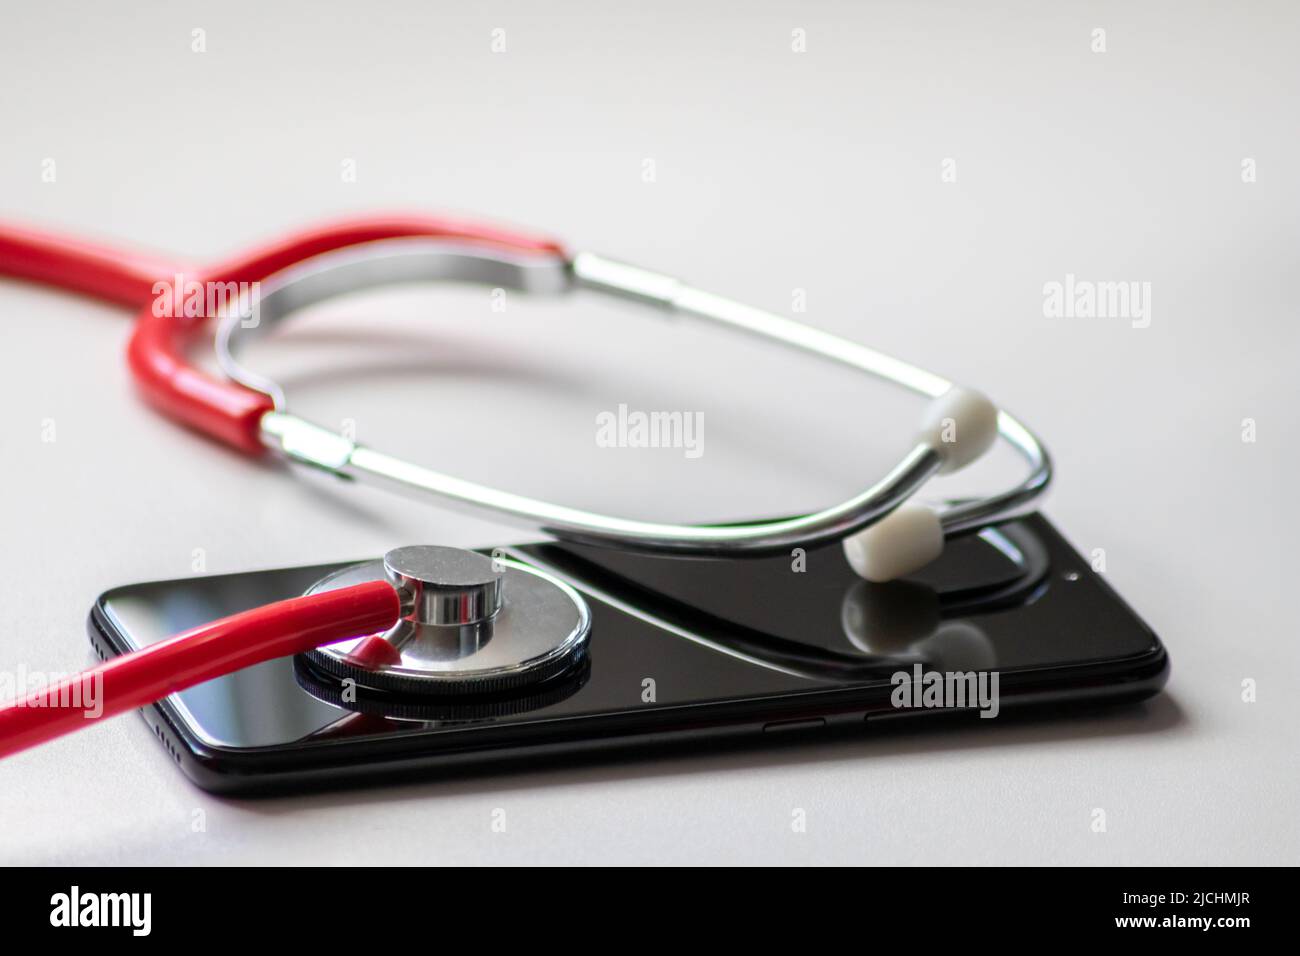 Red stethoscope on black smartphone represents health records and digital patient records with mobile devices for digital doctors digital diagnostic Stock Photo